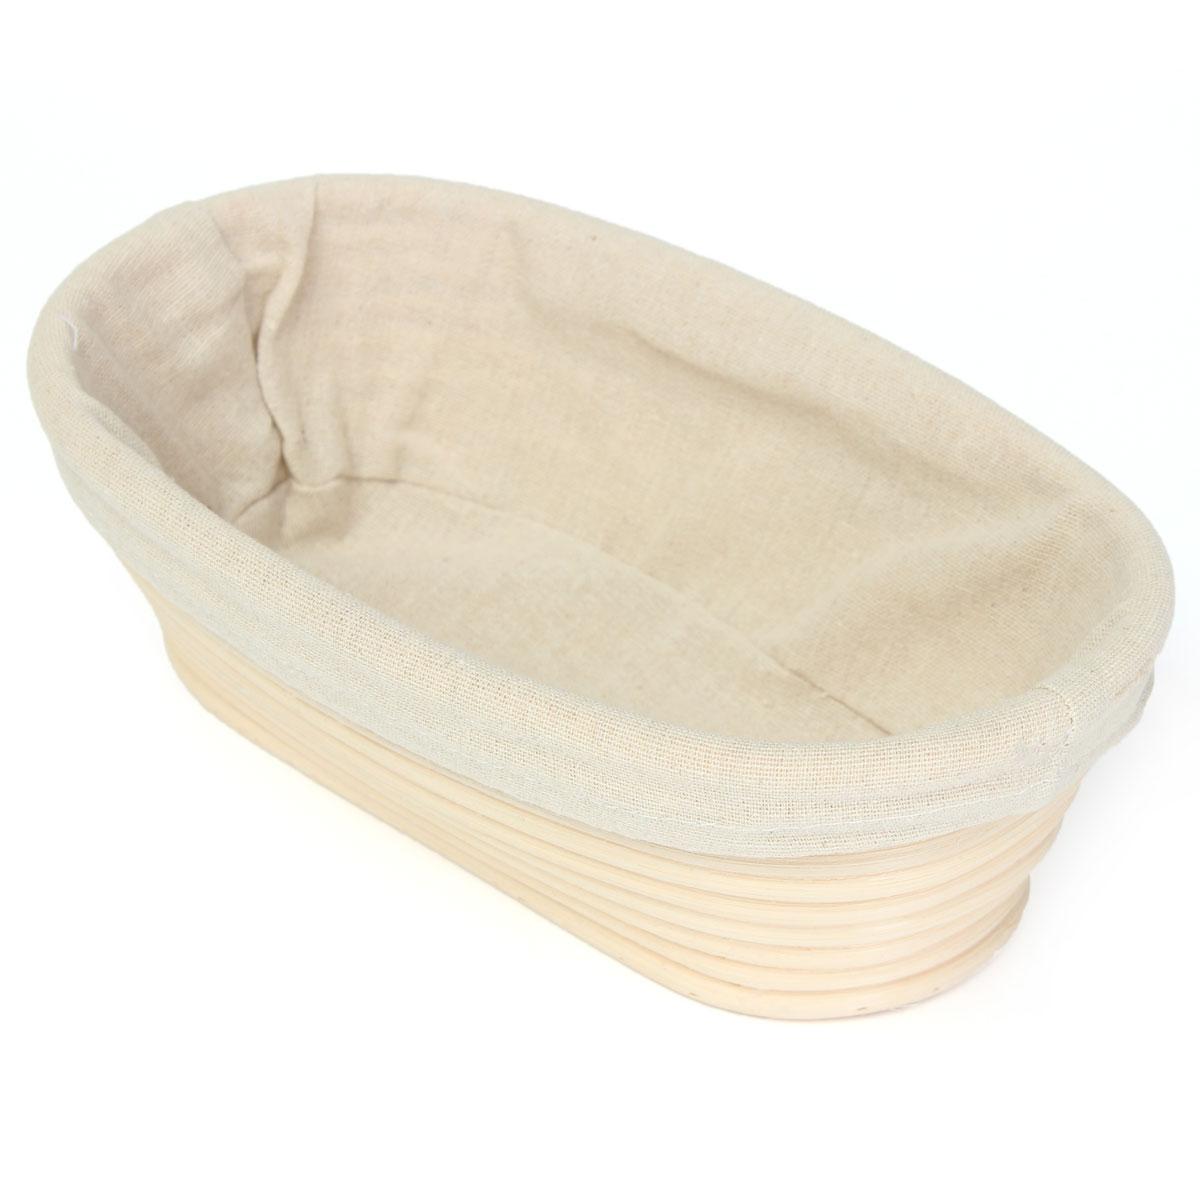 Banneton oval  26x14 cm bread dough proofing basket with canvas